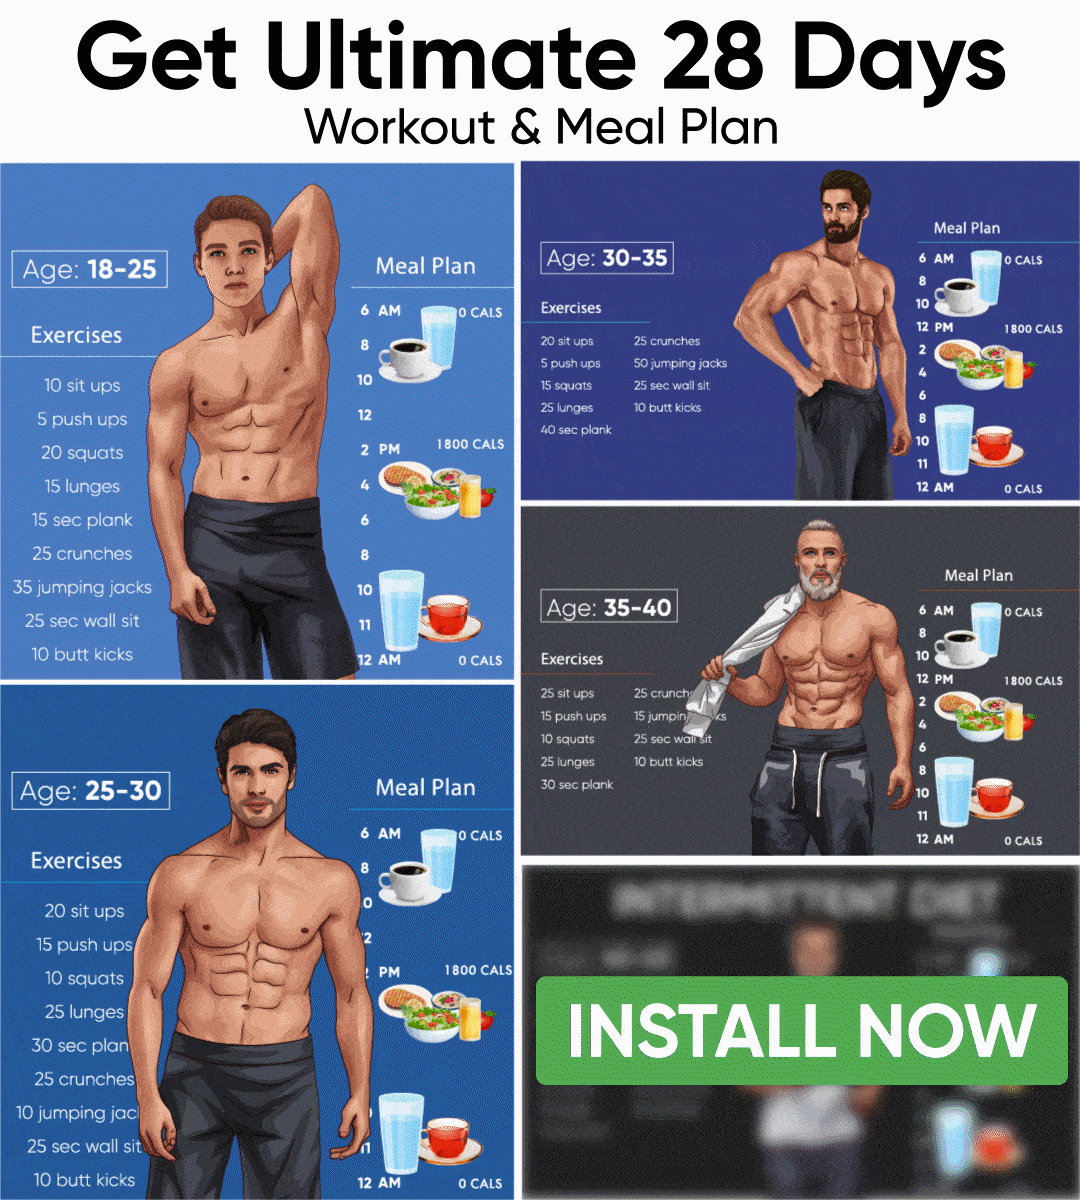 Get Ultimate 28 Days Workout & Meal Plan